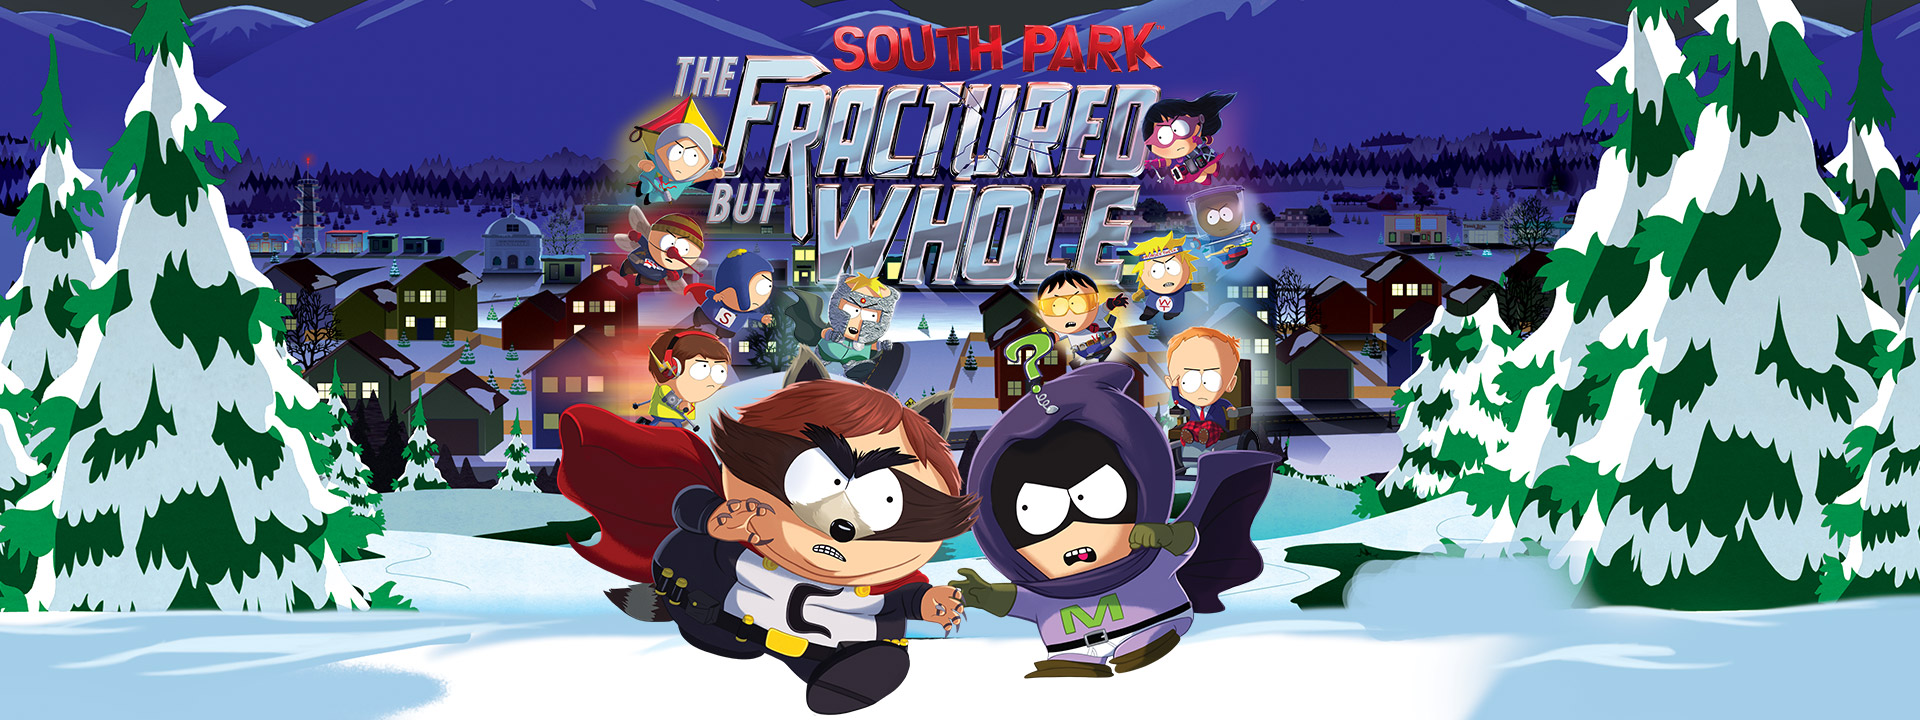   South Park The Fractured but Whole ,  , 